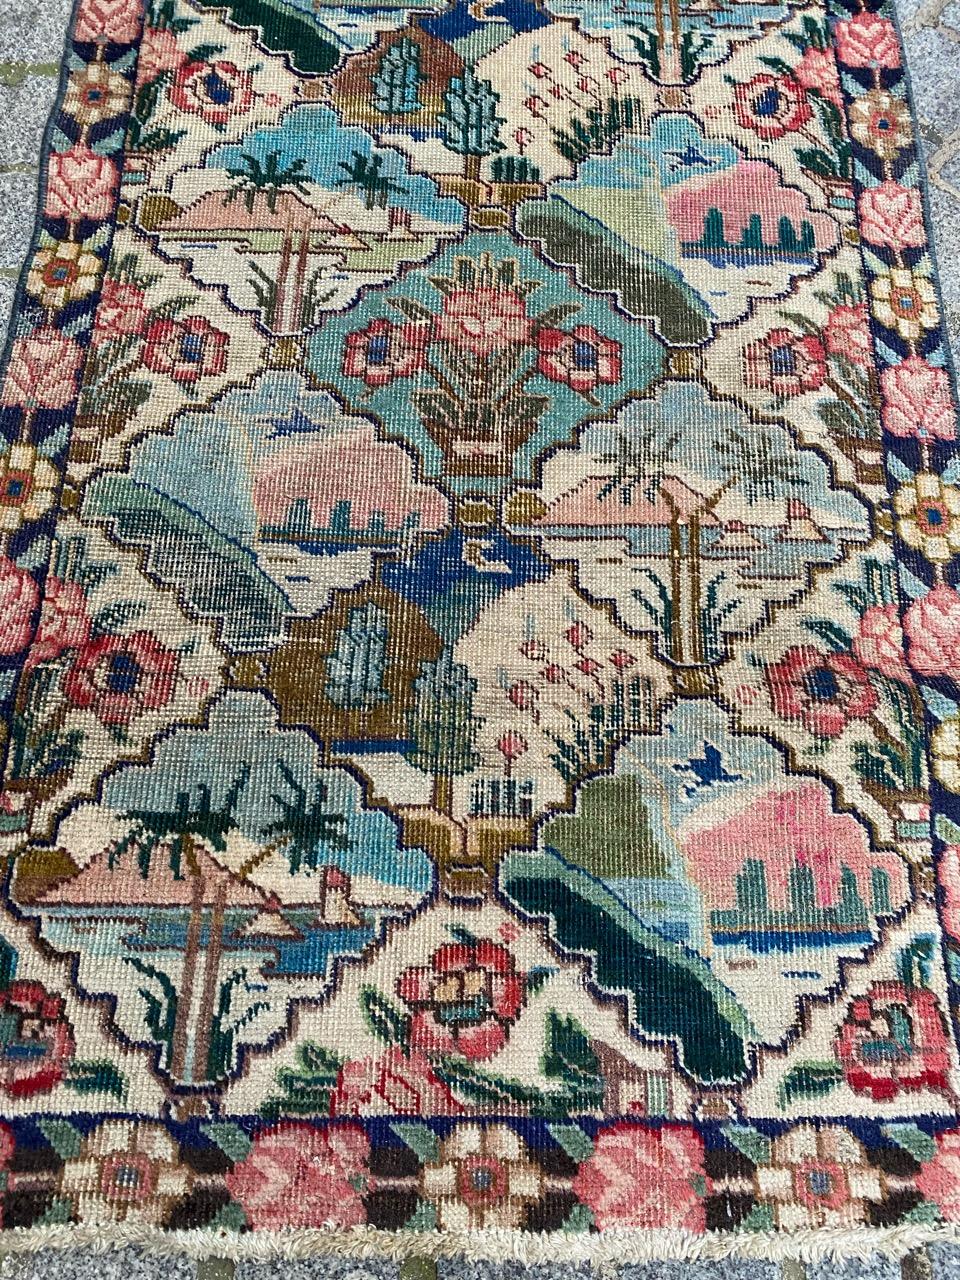 Very beautiful mid century mahal rug with a garden design and beautiful colors, entirely hand knotted with wool velvet on cotton foundation.

✨✨✨
